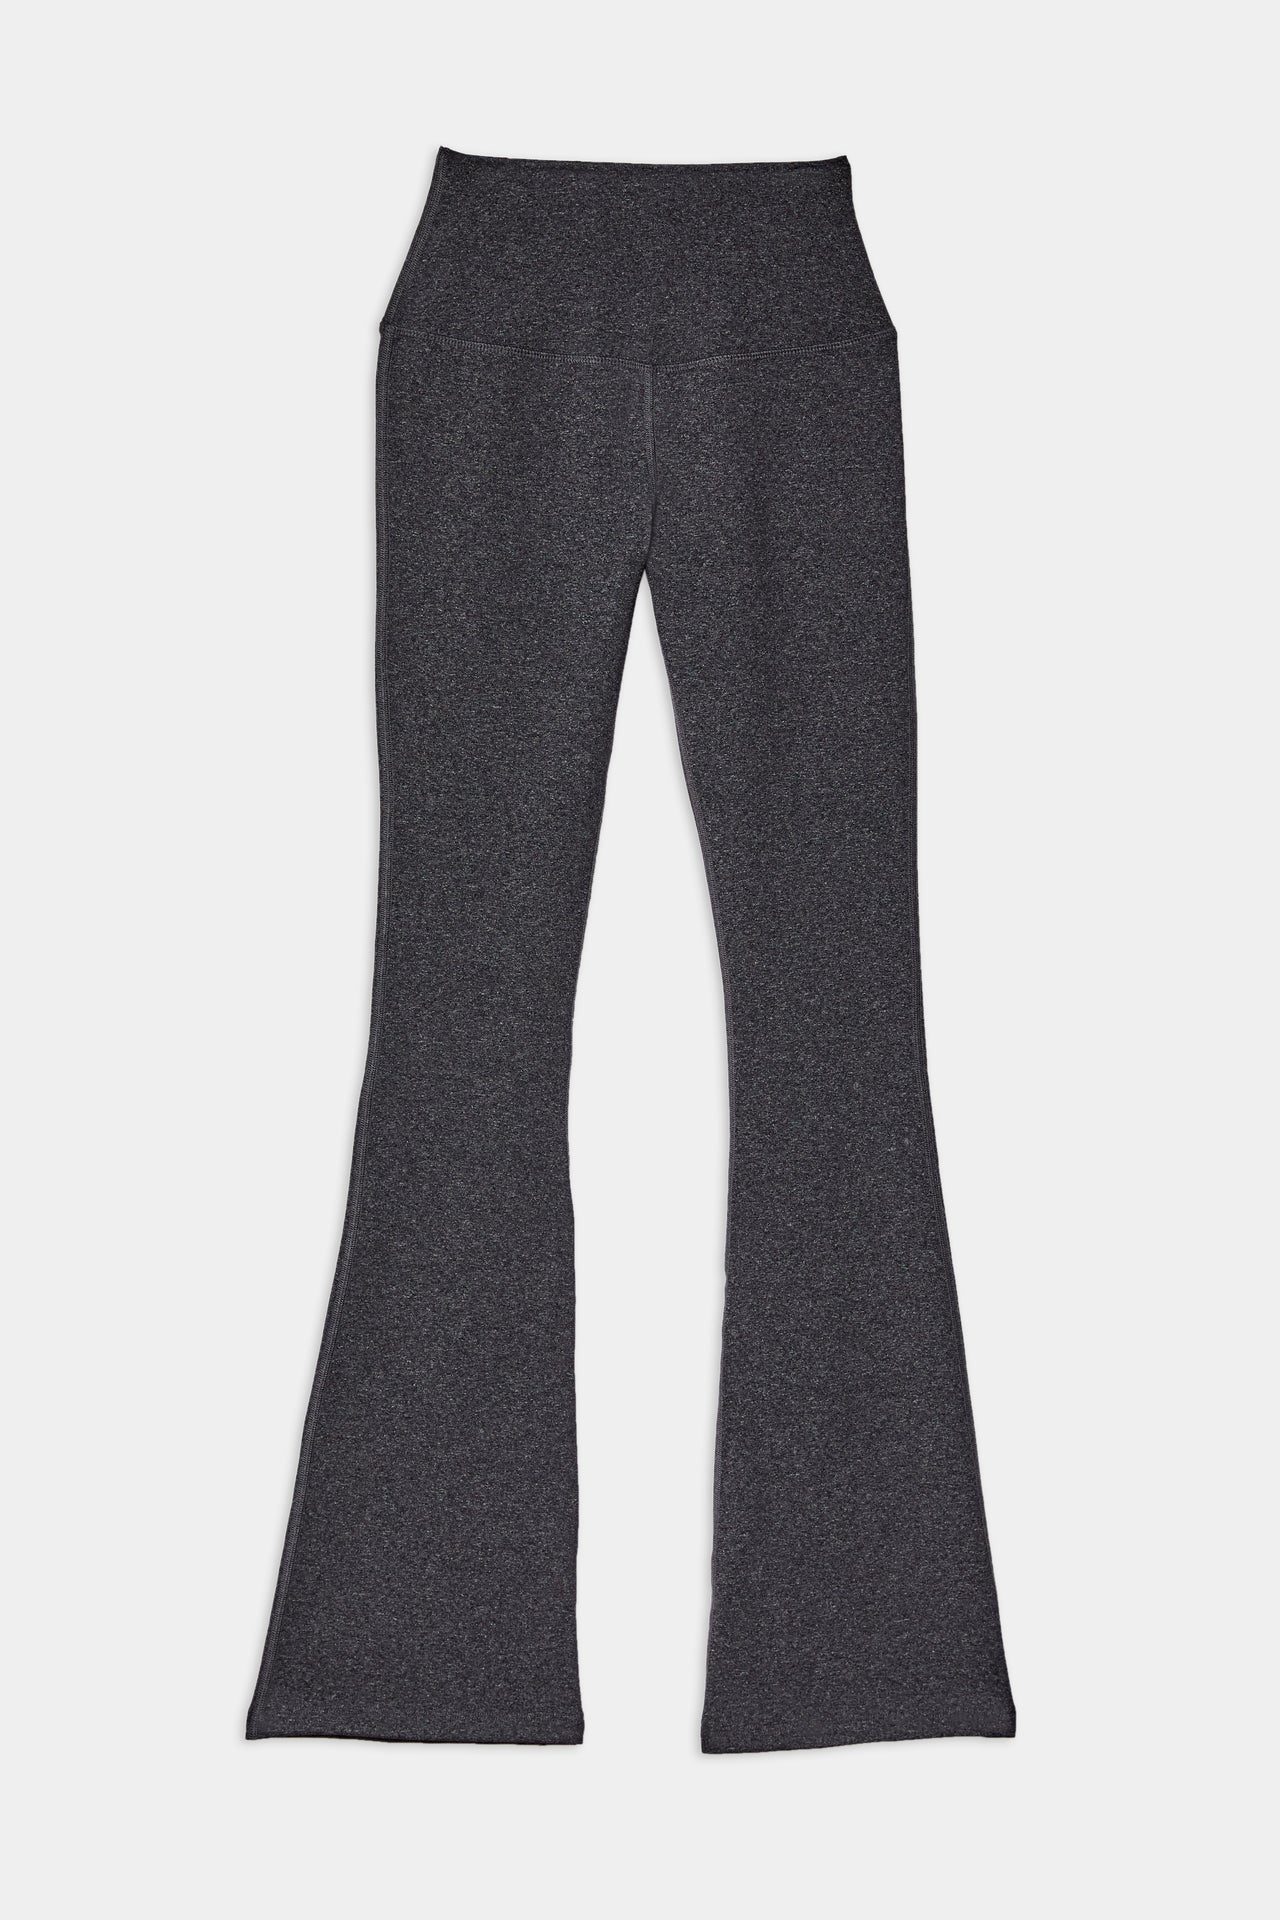 Front flat view of dark gray high waist below ankle length legging with wide flared bottoms